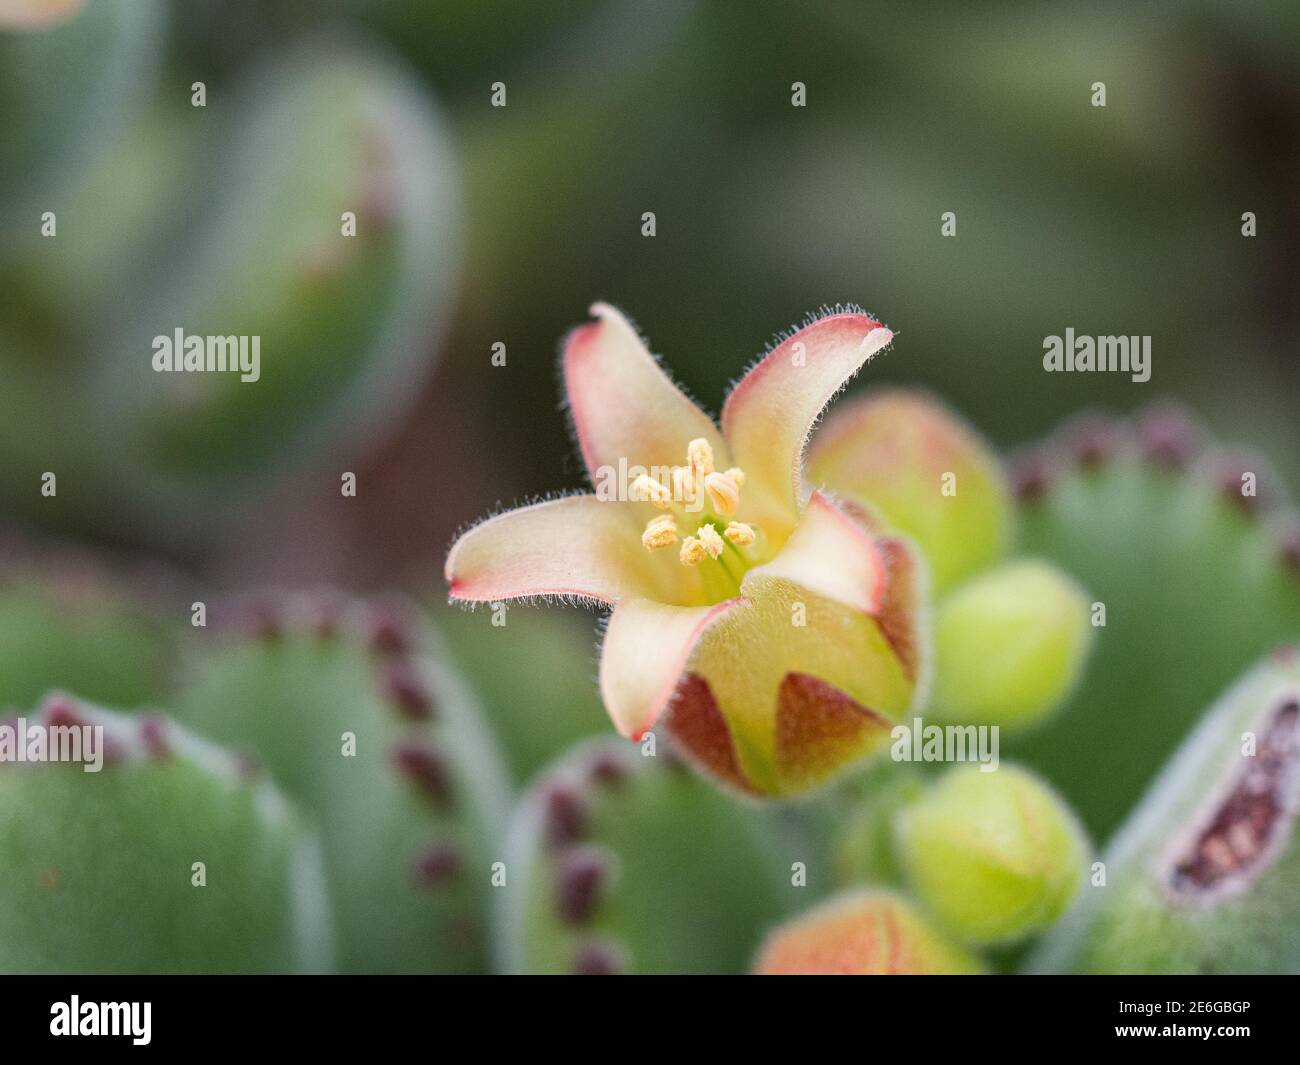 A close up of a single flower of Cotyledon tomentosa Stock Photo